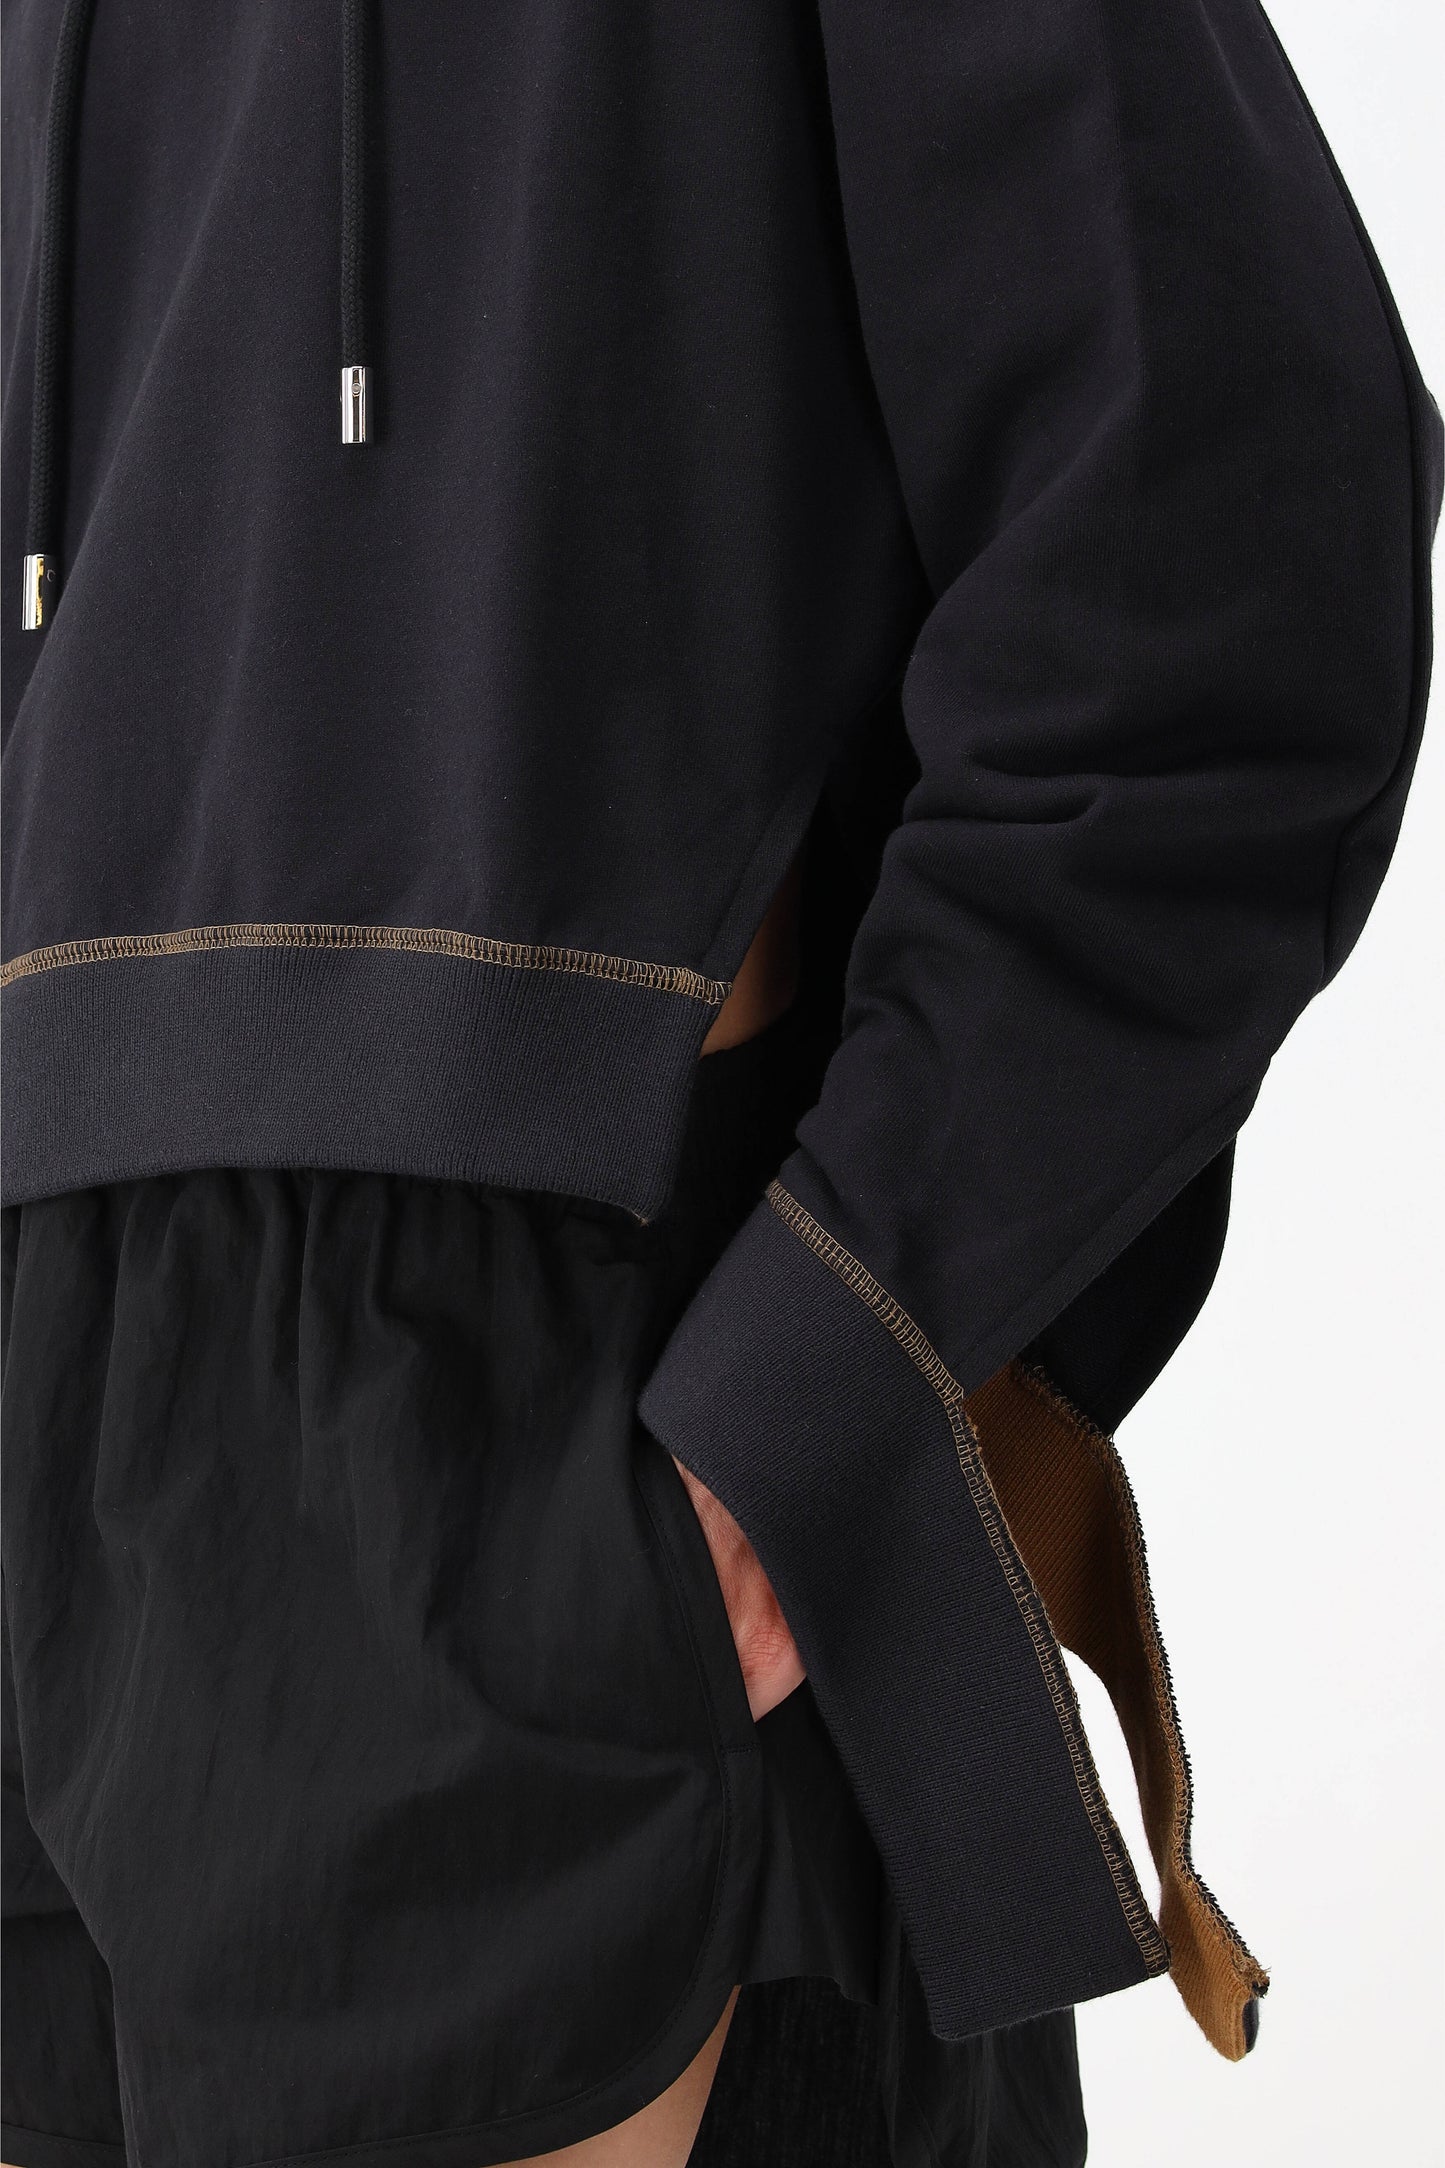 Hoodie Cropped Knot in SchwarzJW Anderson - Anita Hass